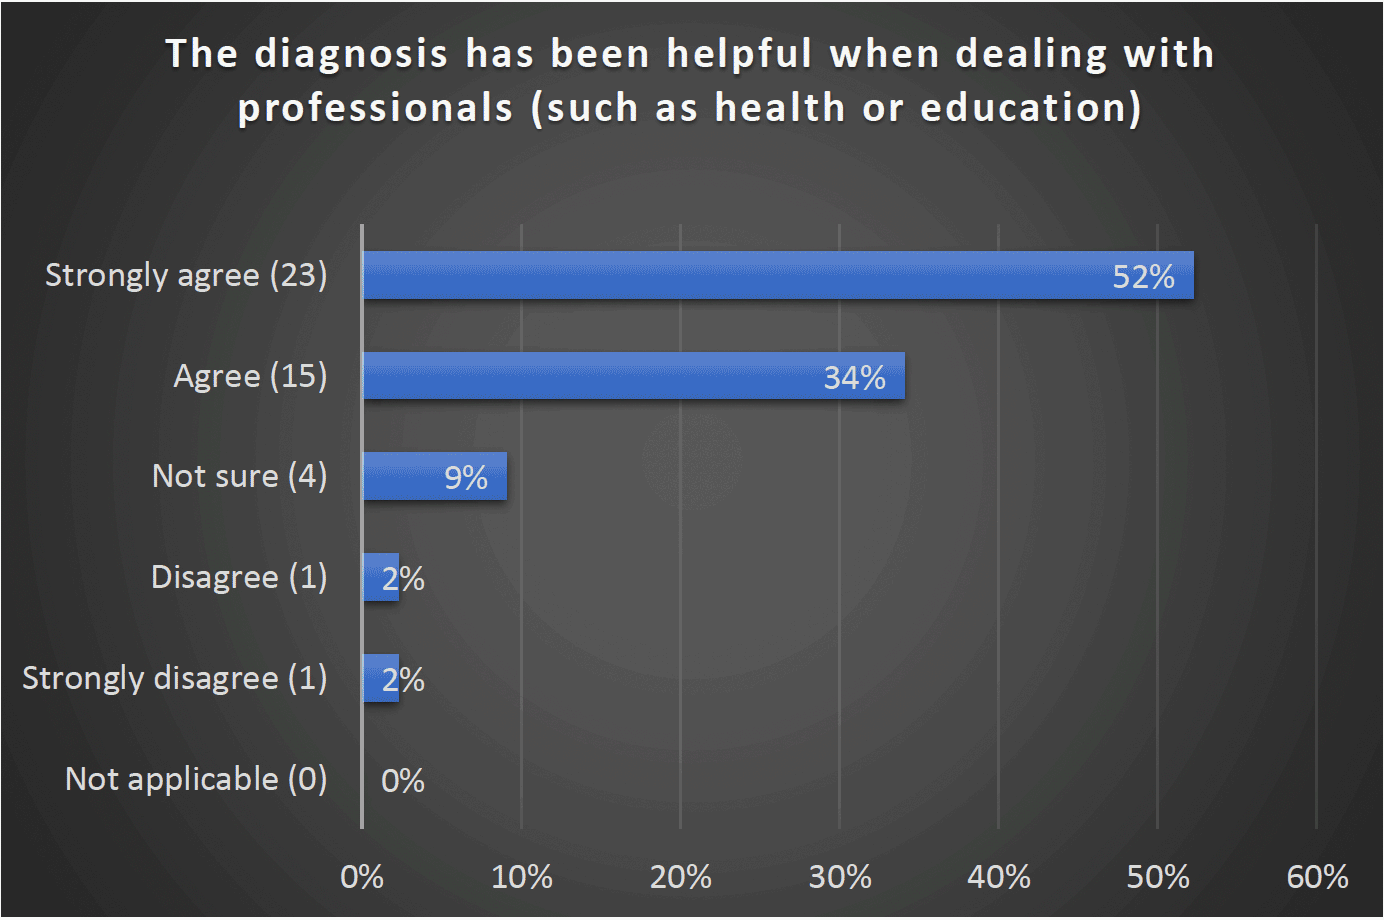 The diagnosis has been helpful when dealing with professionals (such as health or education) - Strongly agree (23) 52%, Agree (15) 34%, Not sure (4) 9%, Disagree (1) 2%, Strongly disagree (1) 2%